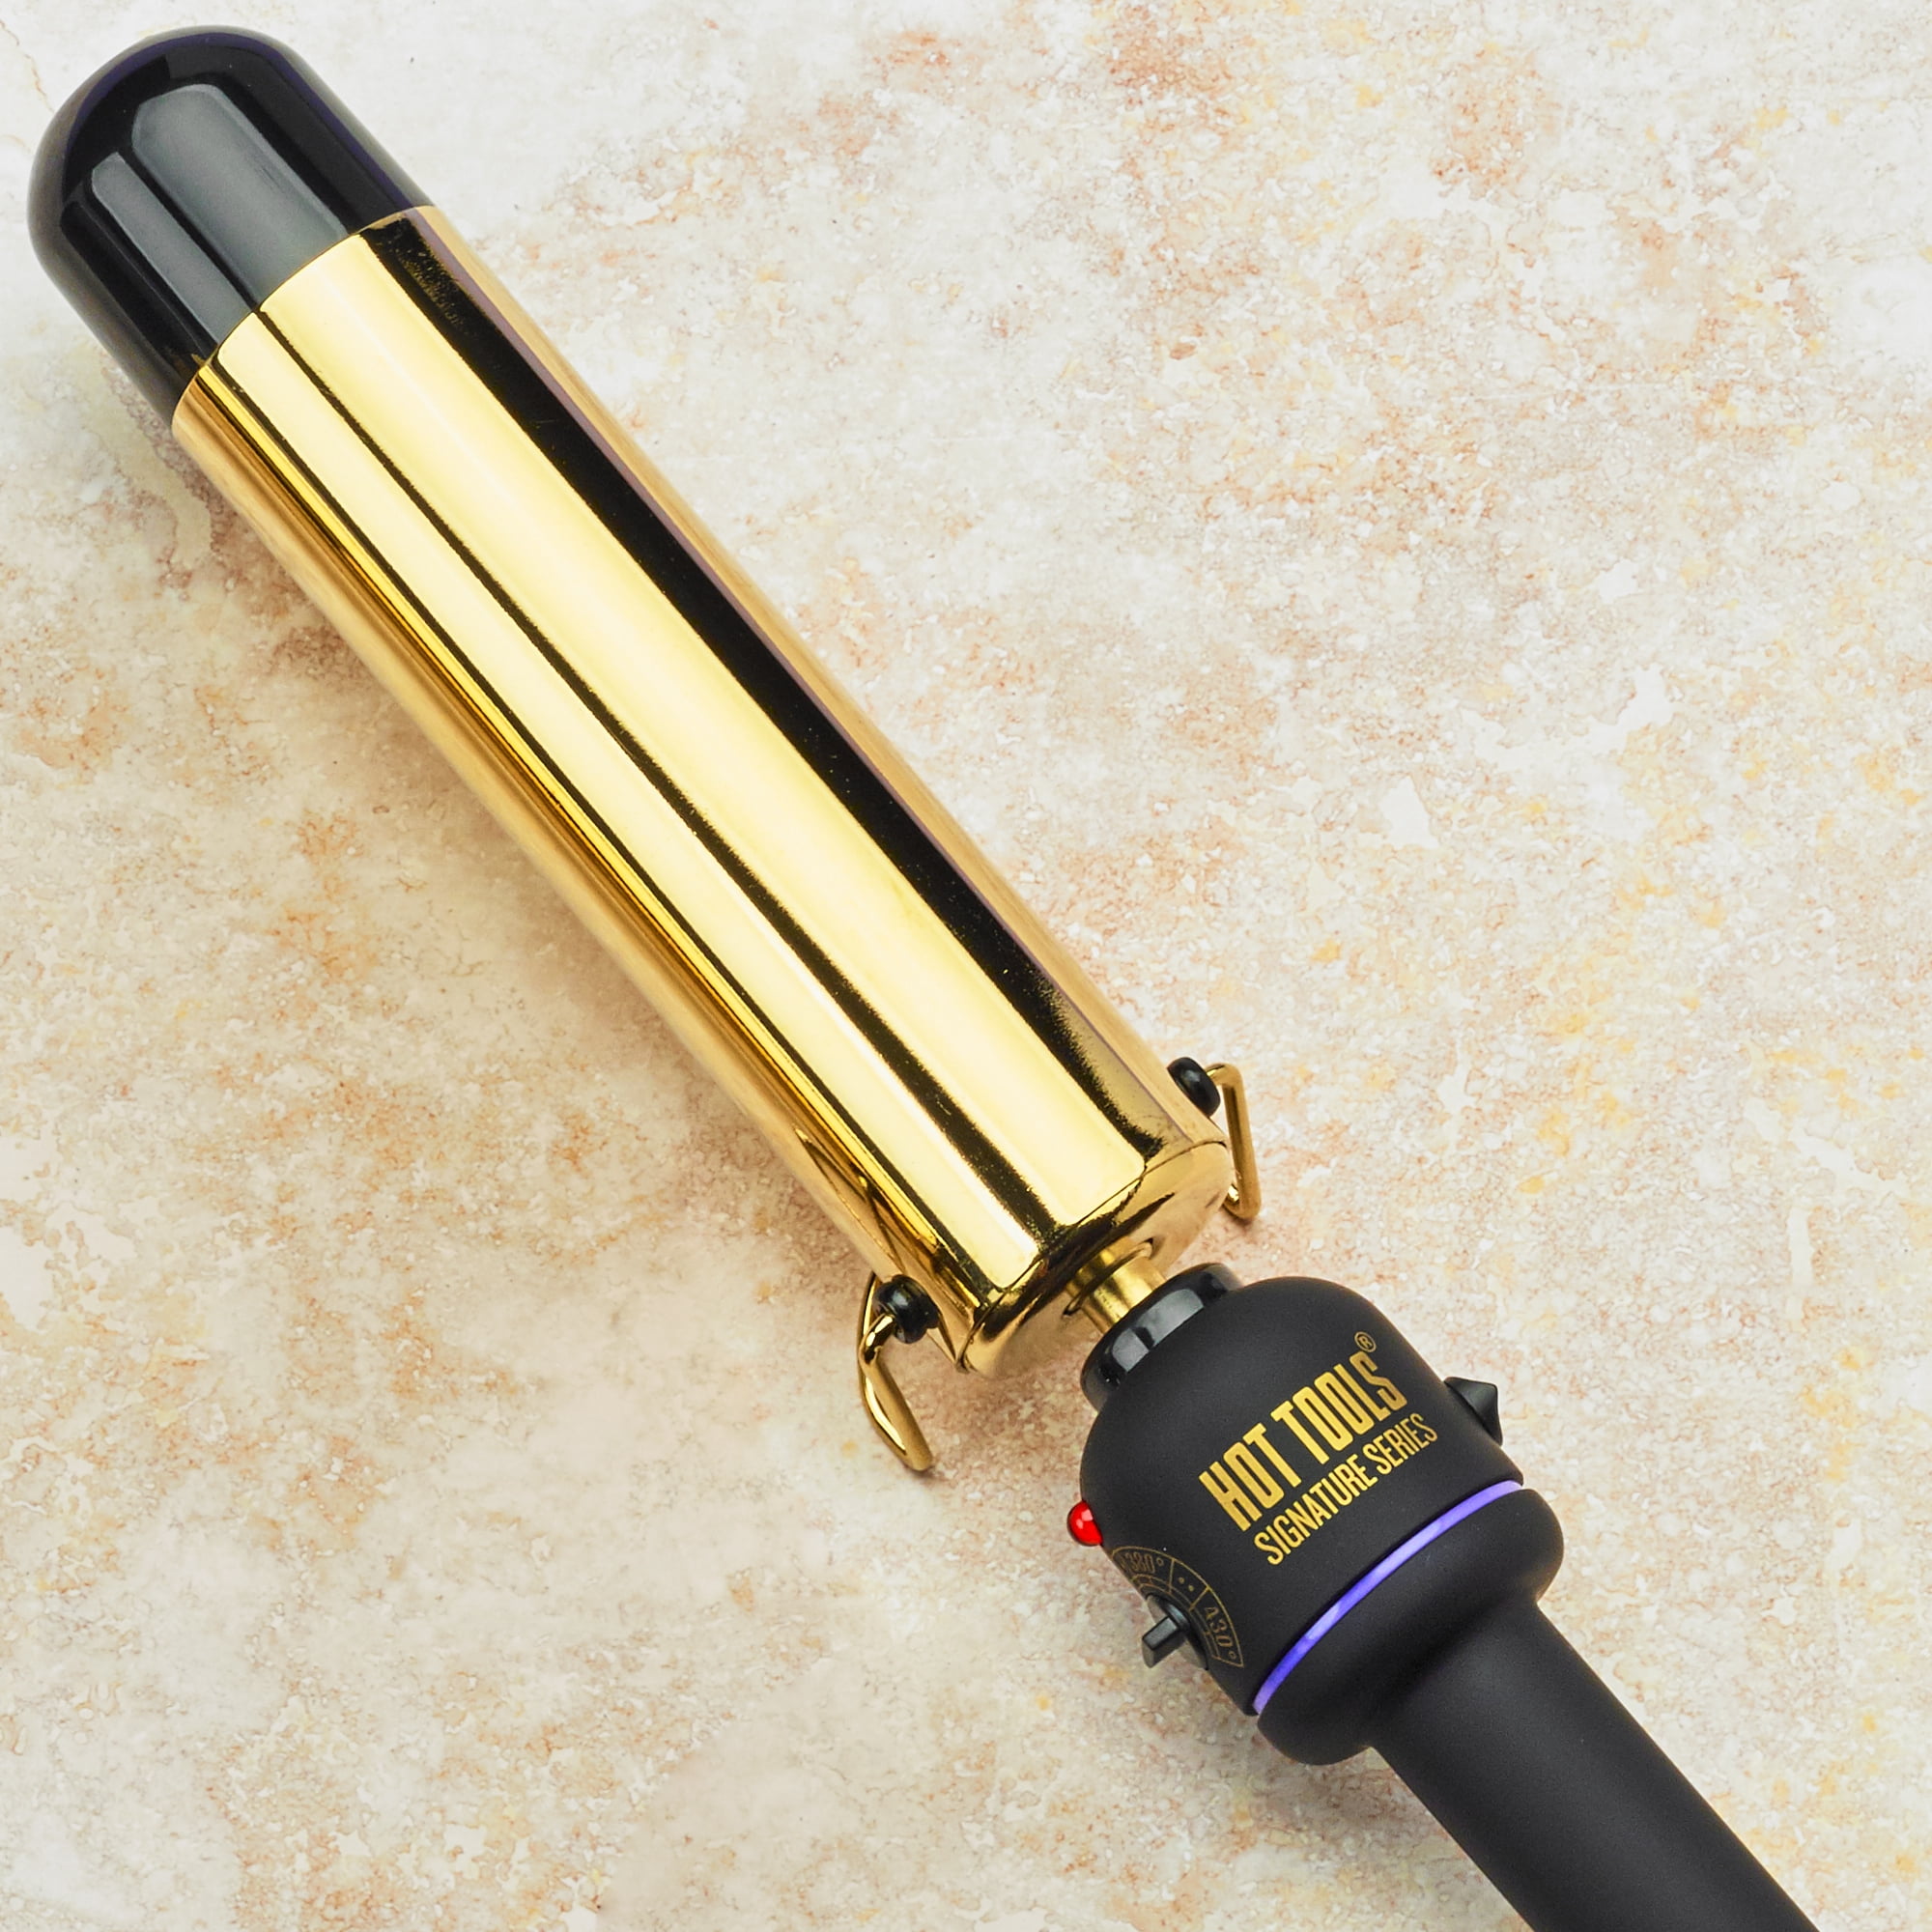 HOT TOOLS 1 1/2” GOLD CURLING IRON/WAND